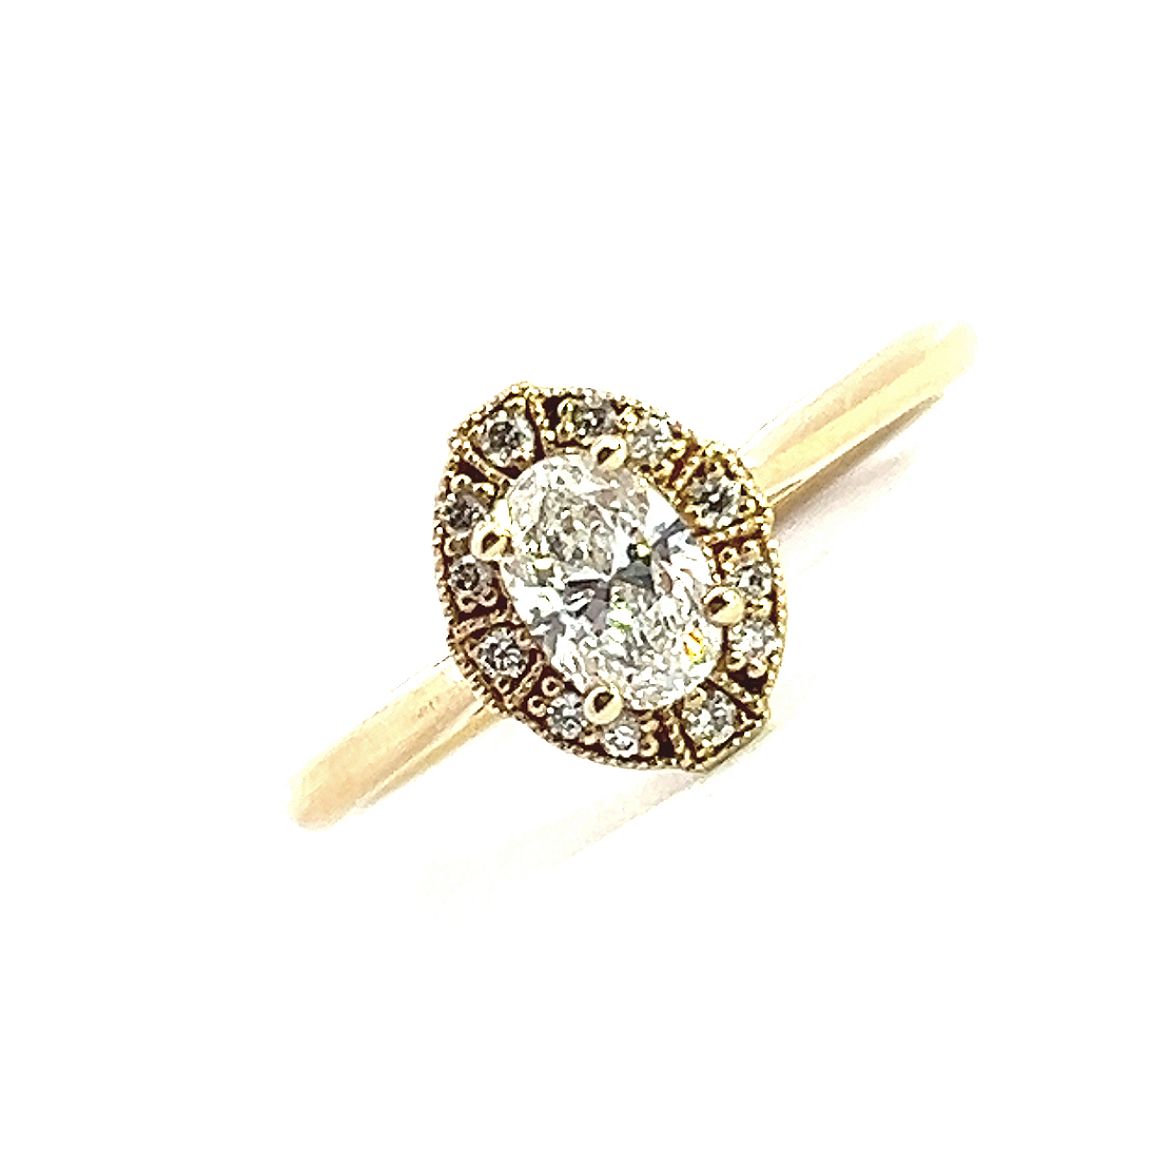 18 Carat Yellow Gold and Diamond Vintage Style Ring 0.41 FVS1